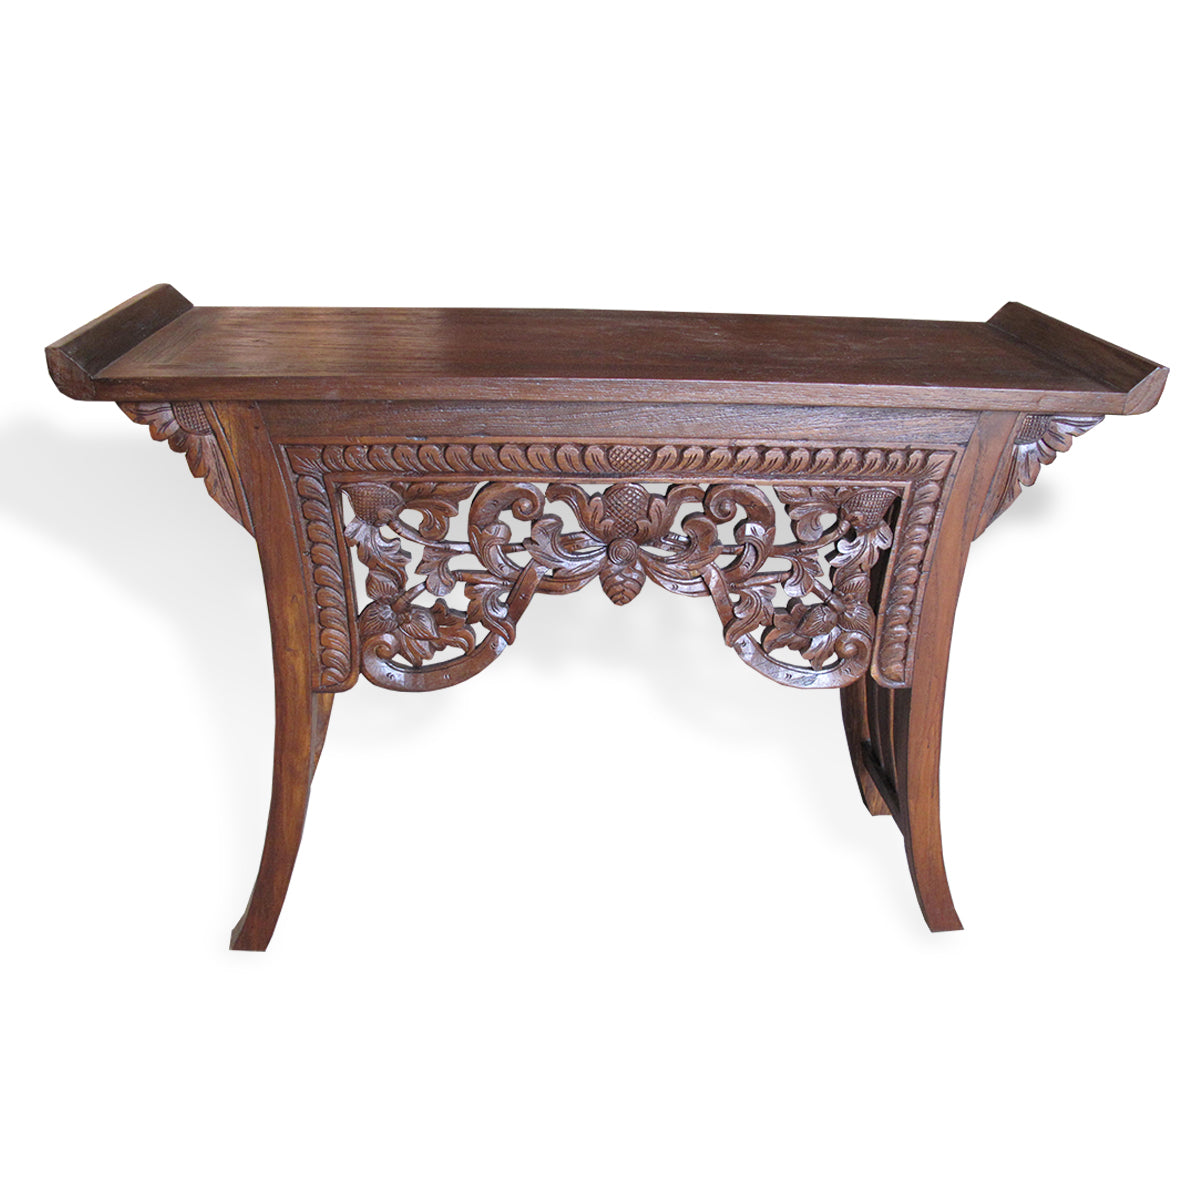 LAC045-1 MEDIUM BROWN RECYCLED TEAK WOOD CARVED CONSOLE TABLE